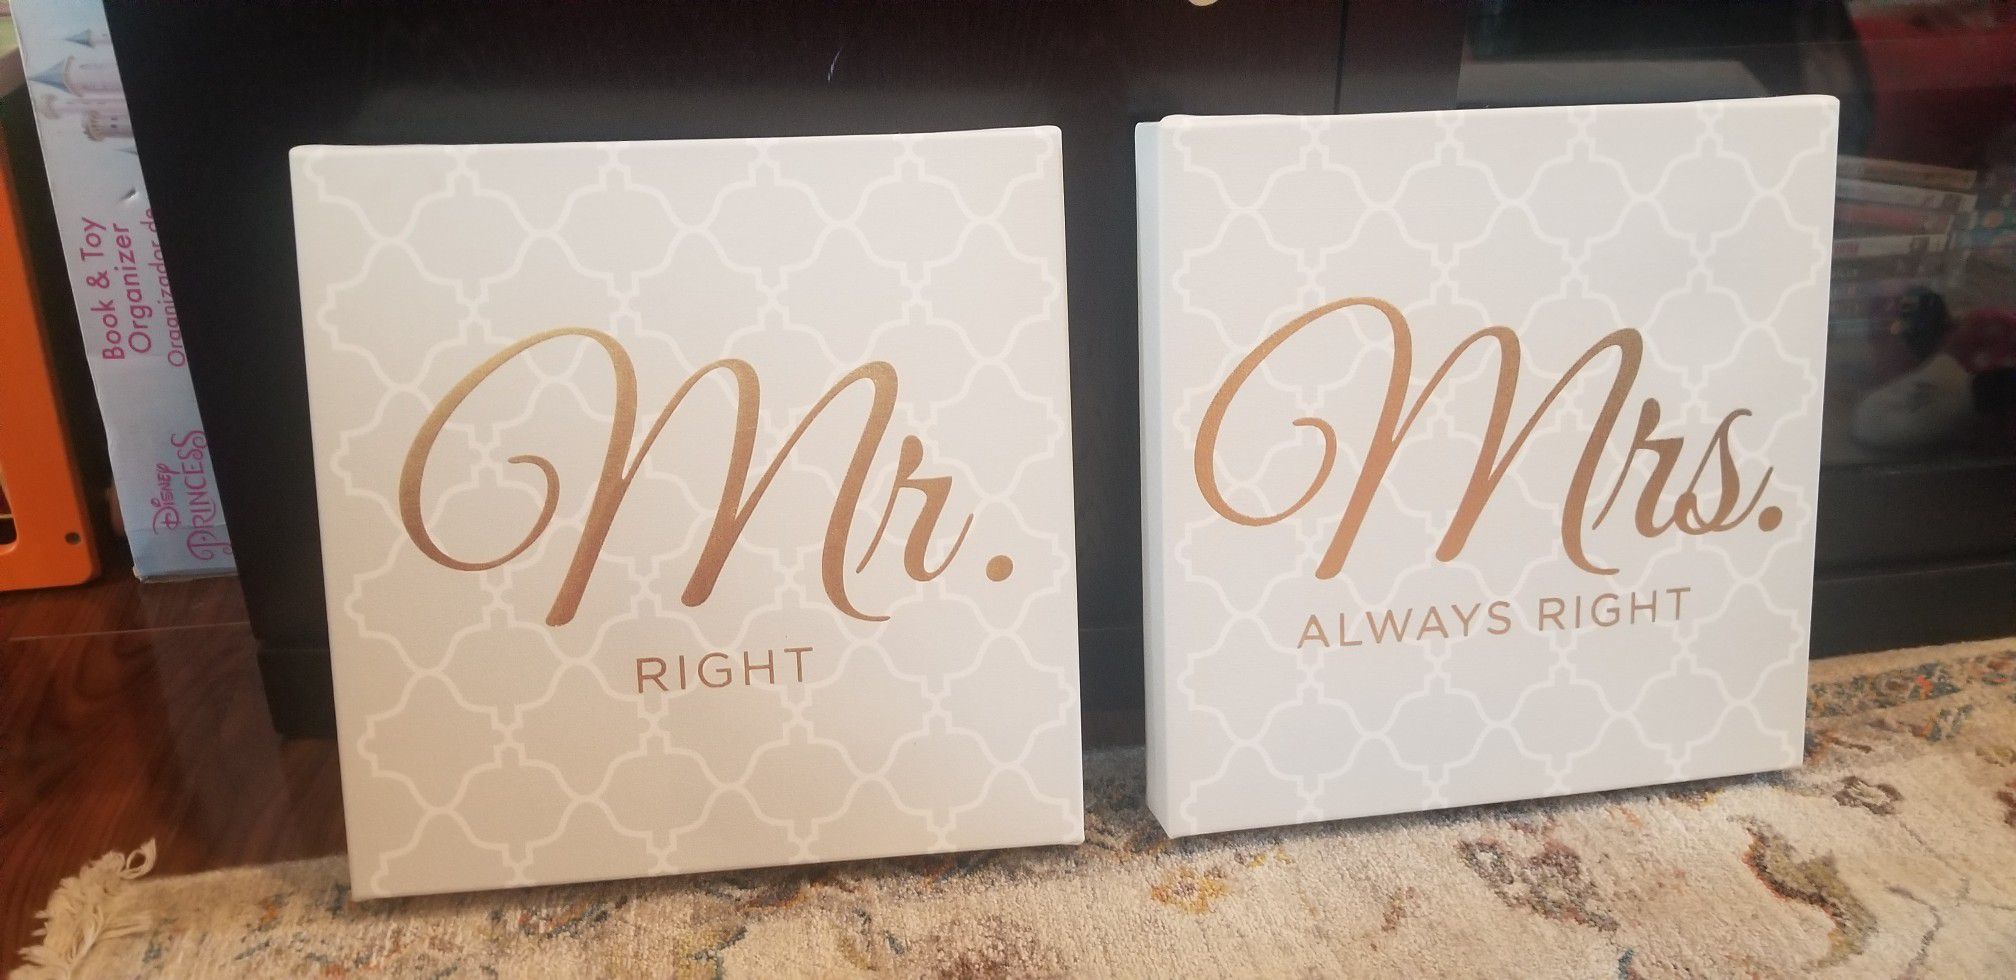 Mr. Right & Mrs. Always Right wall decor